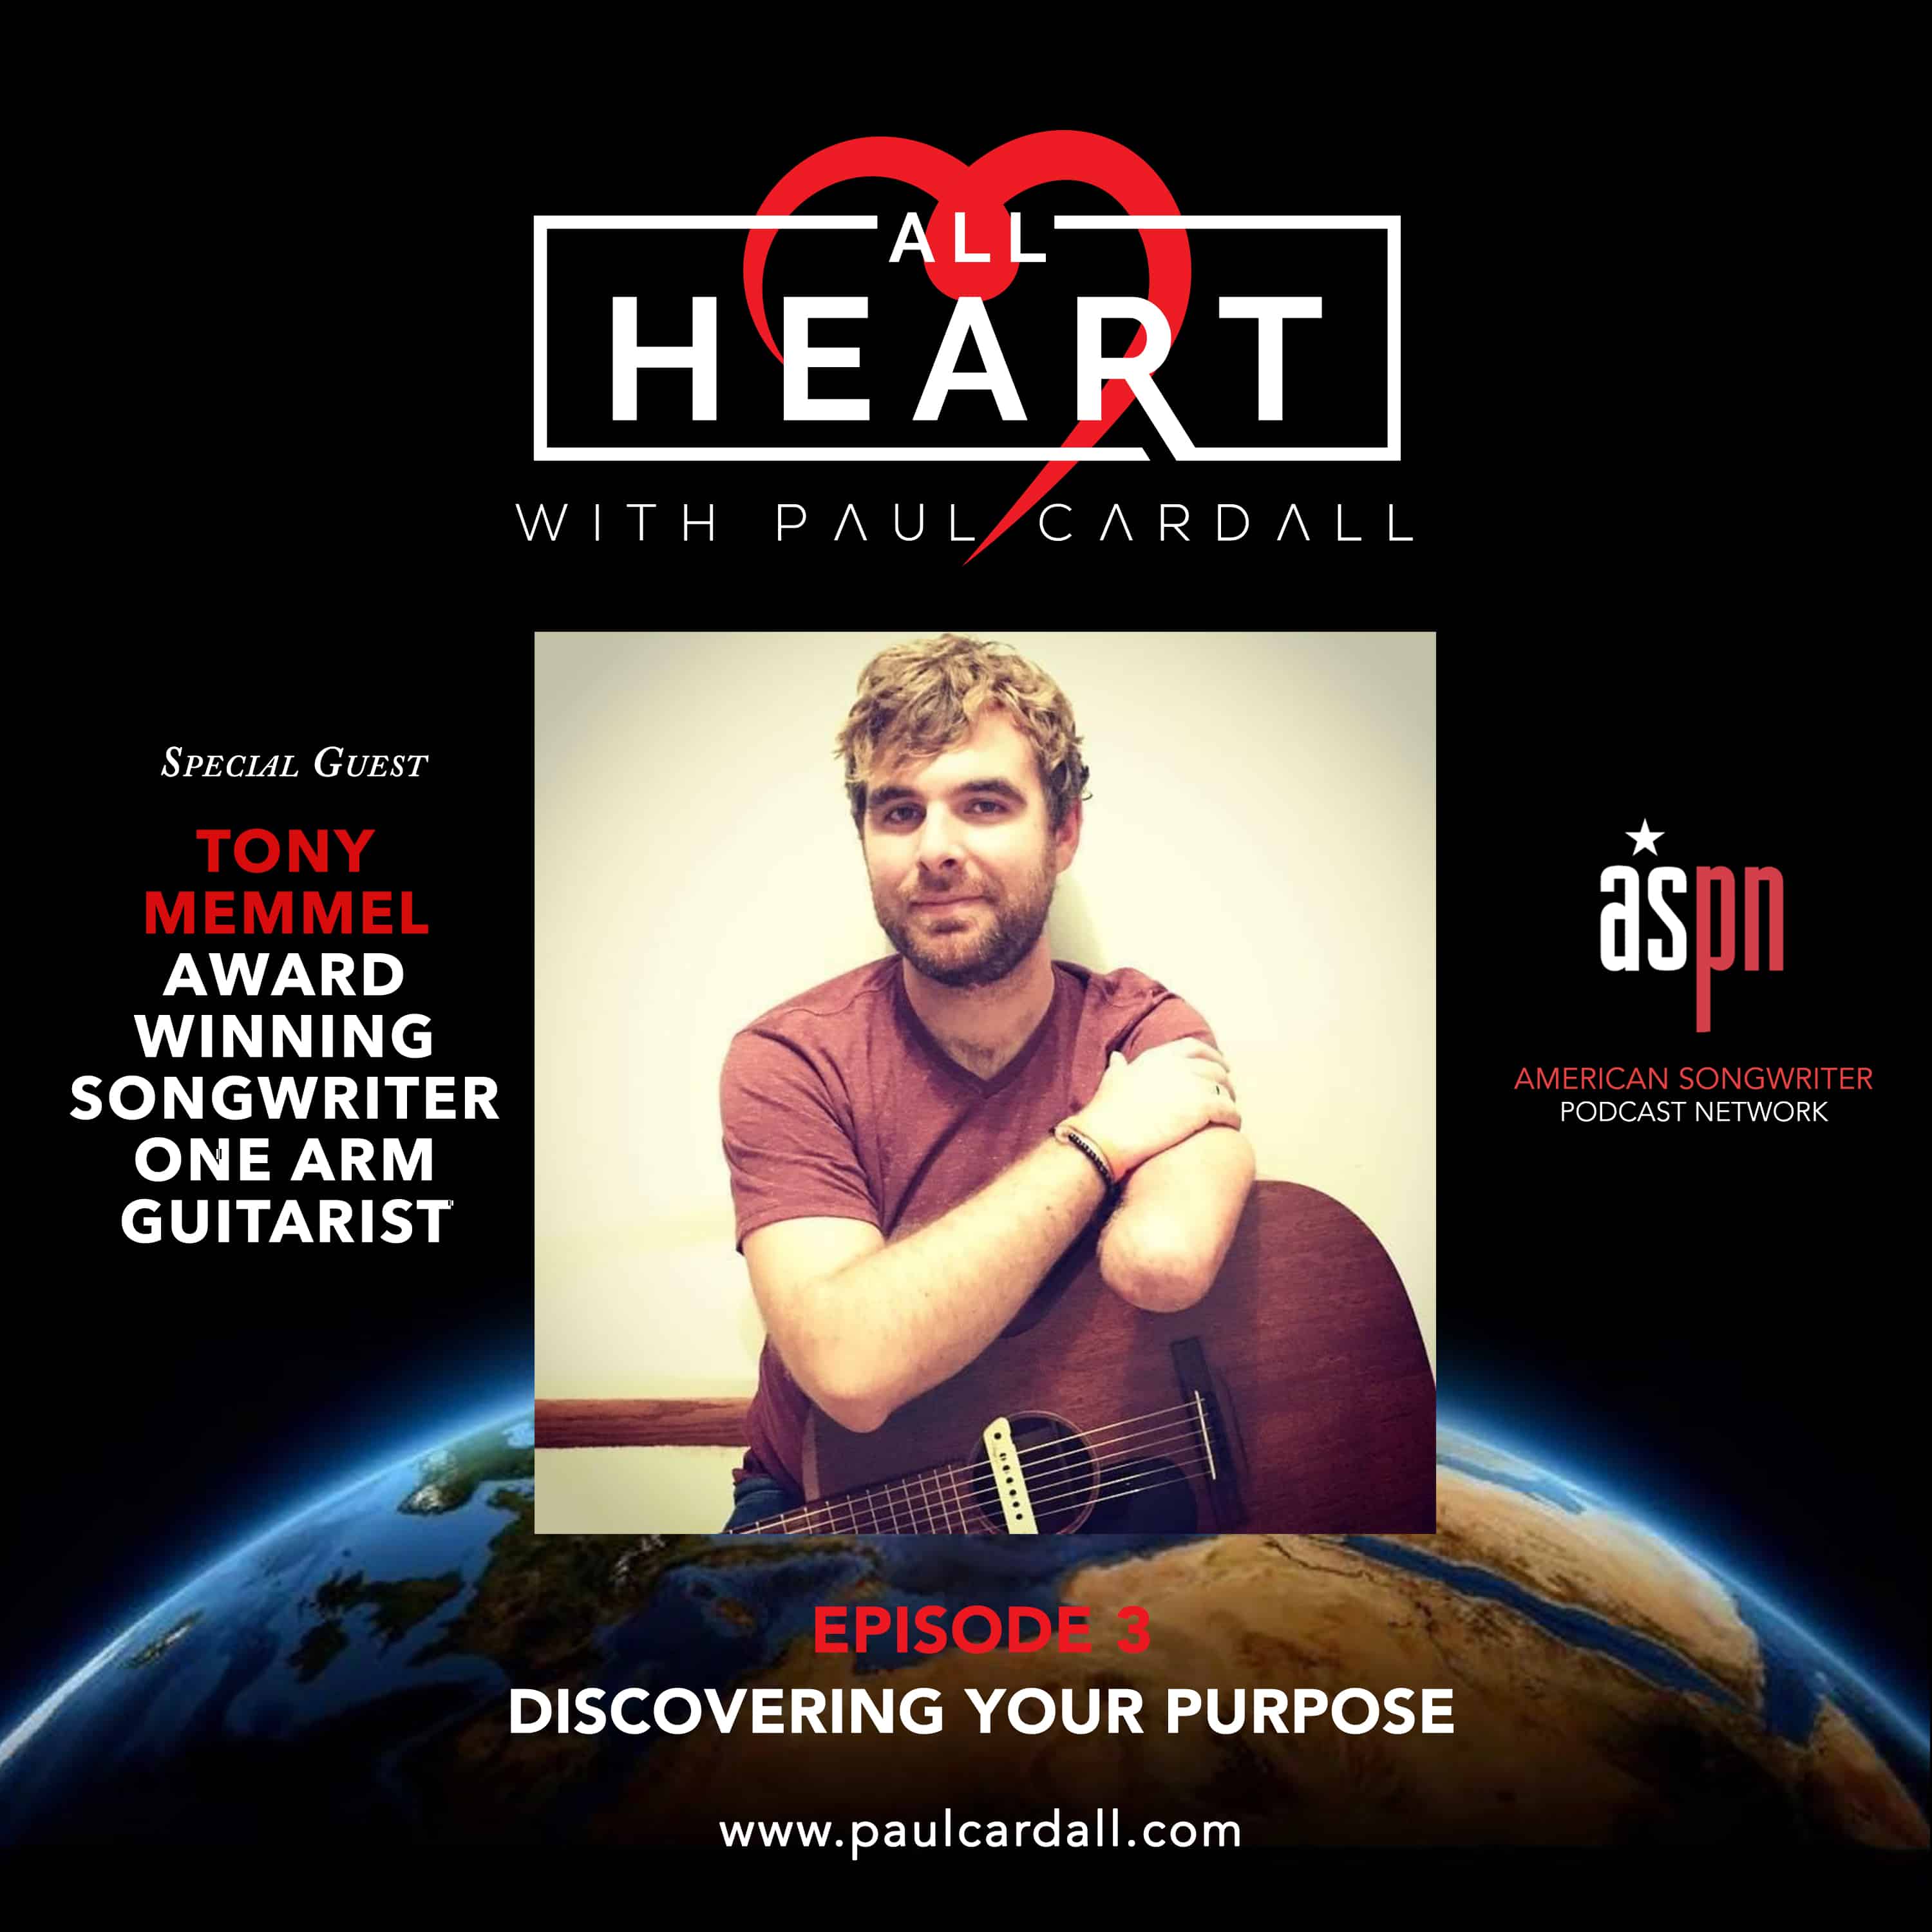 ‘All Heart’ Podcast Talks with Tony Memmel about Discovering Purpose